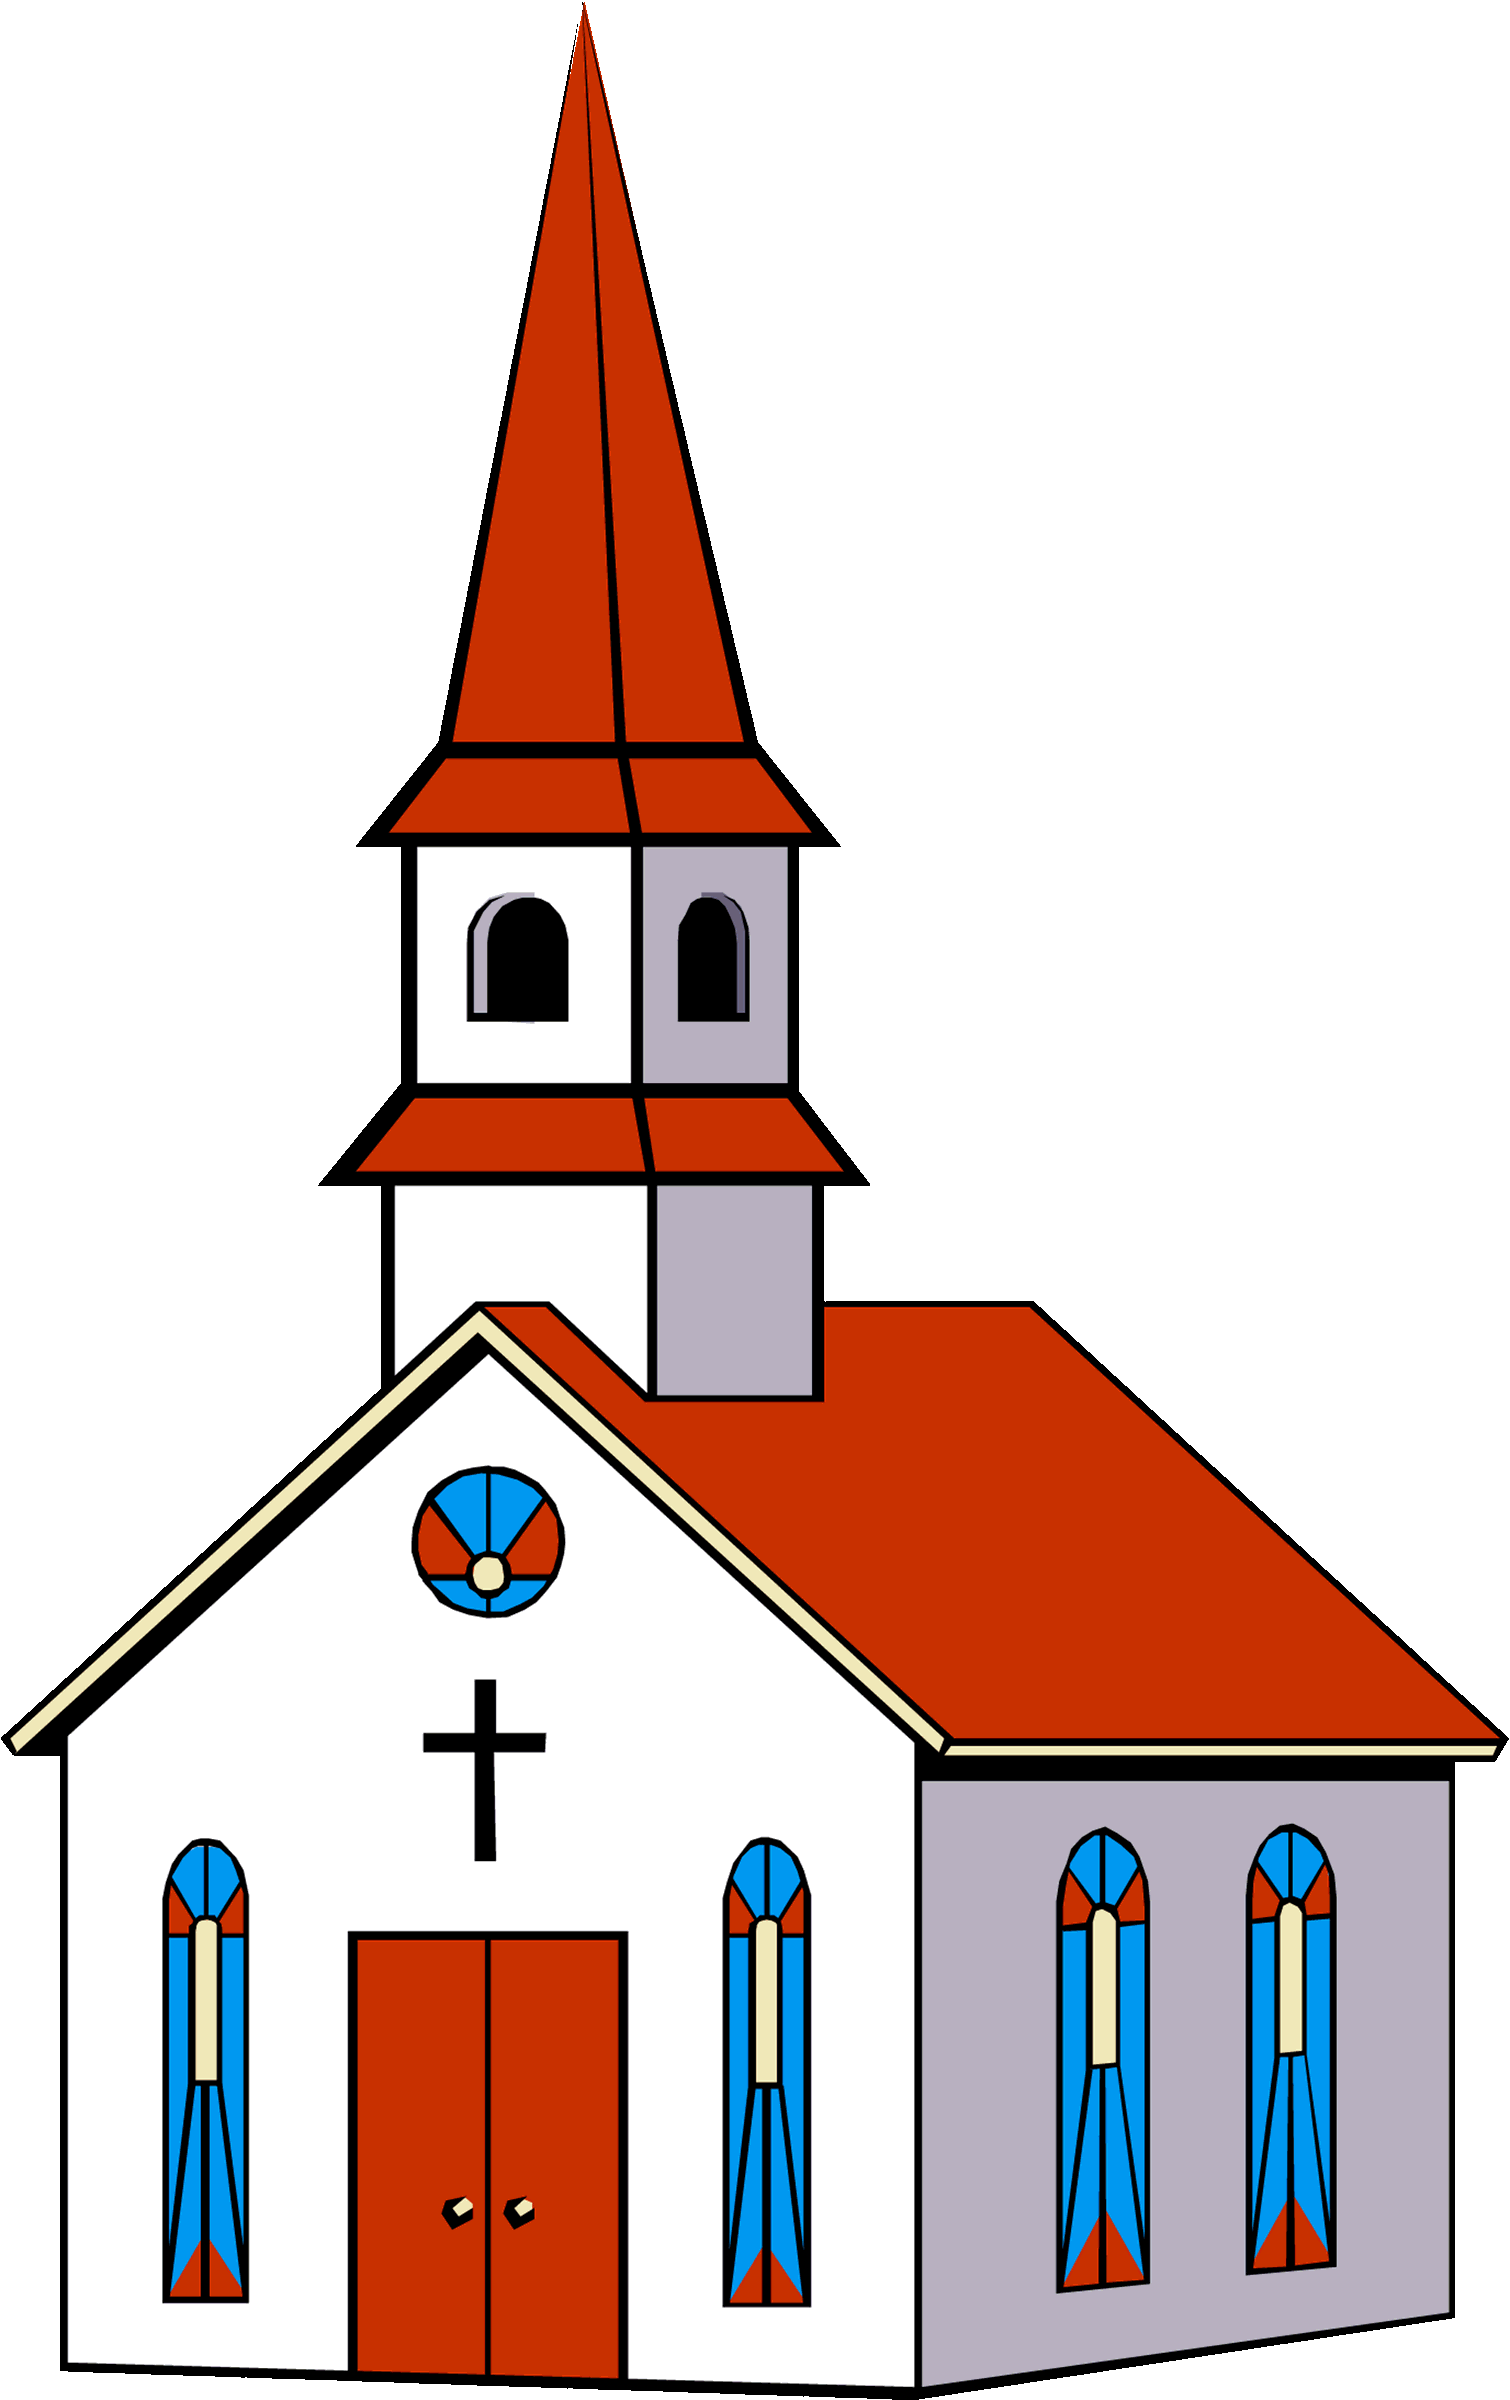 Graduation clipart religious. Free images of church